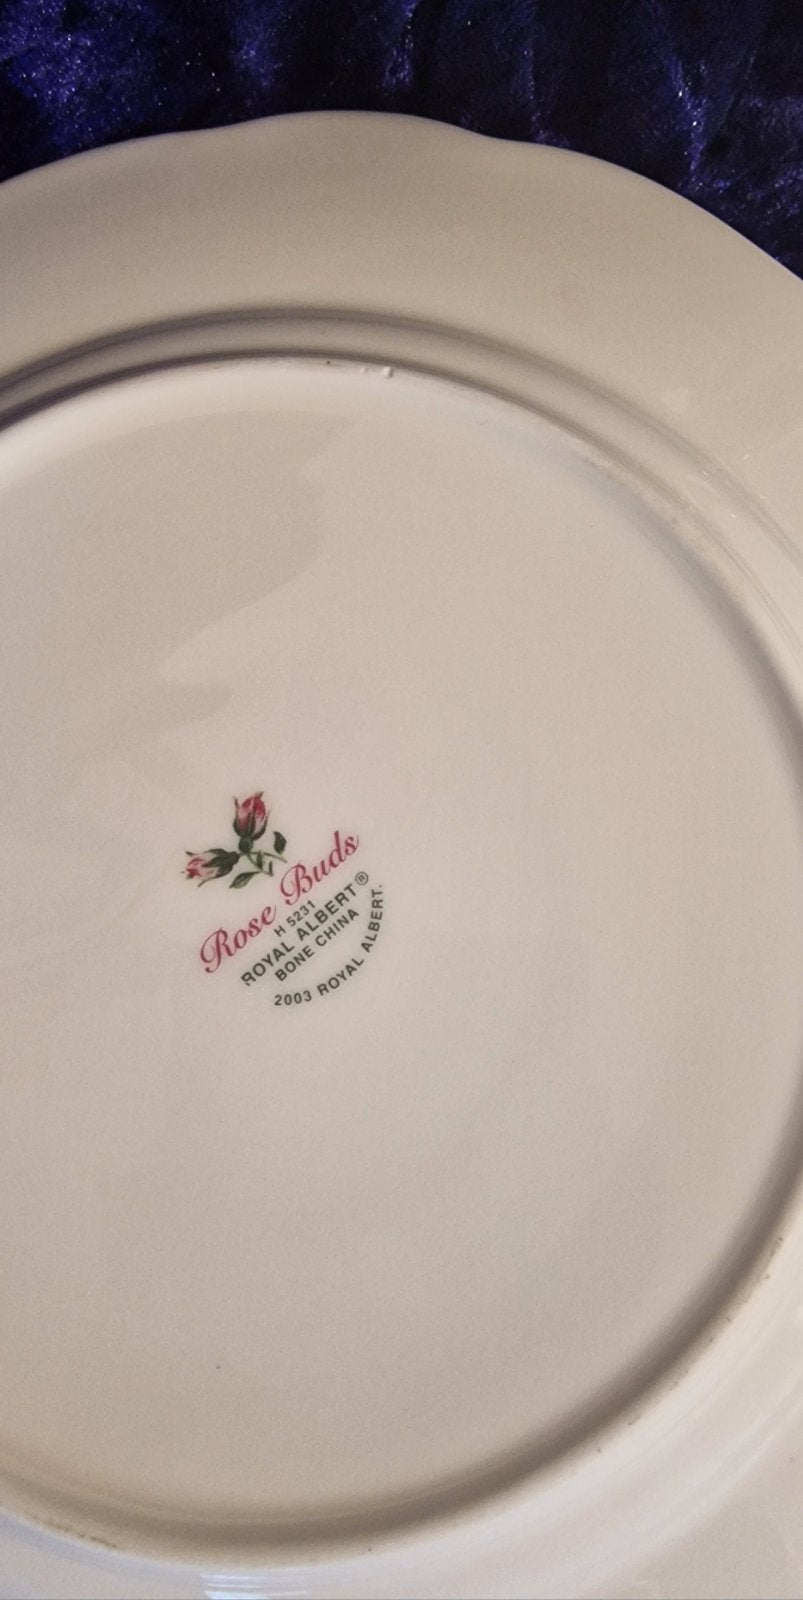 Charming Royal Albert 2004 Rose Buds plates adorned with pink roses, suitable for cake or side portions